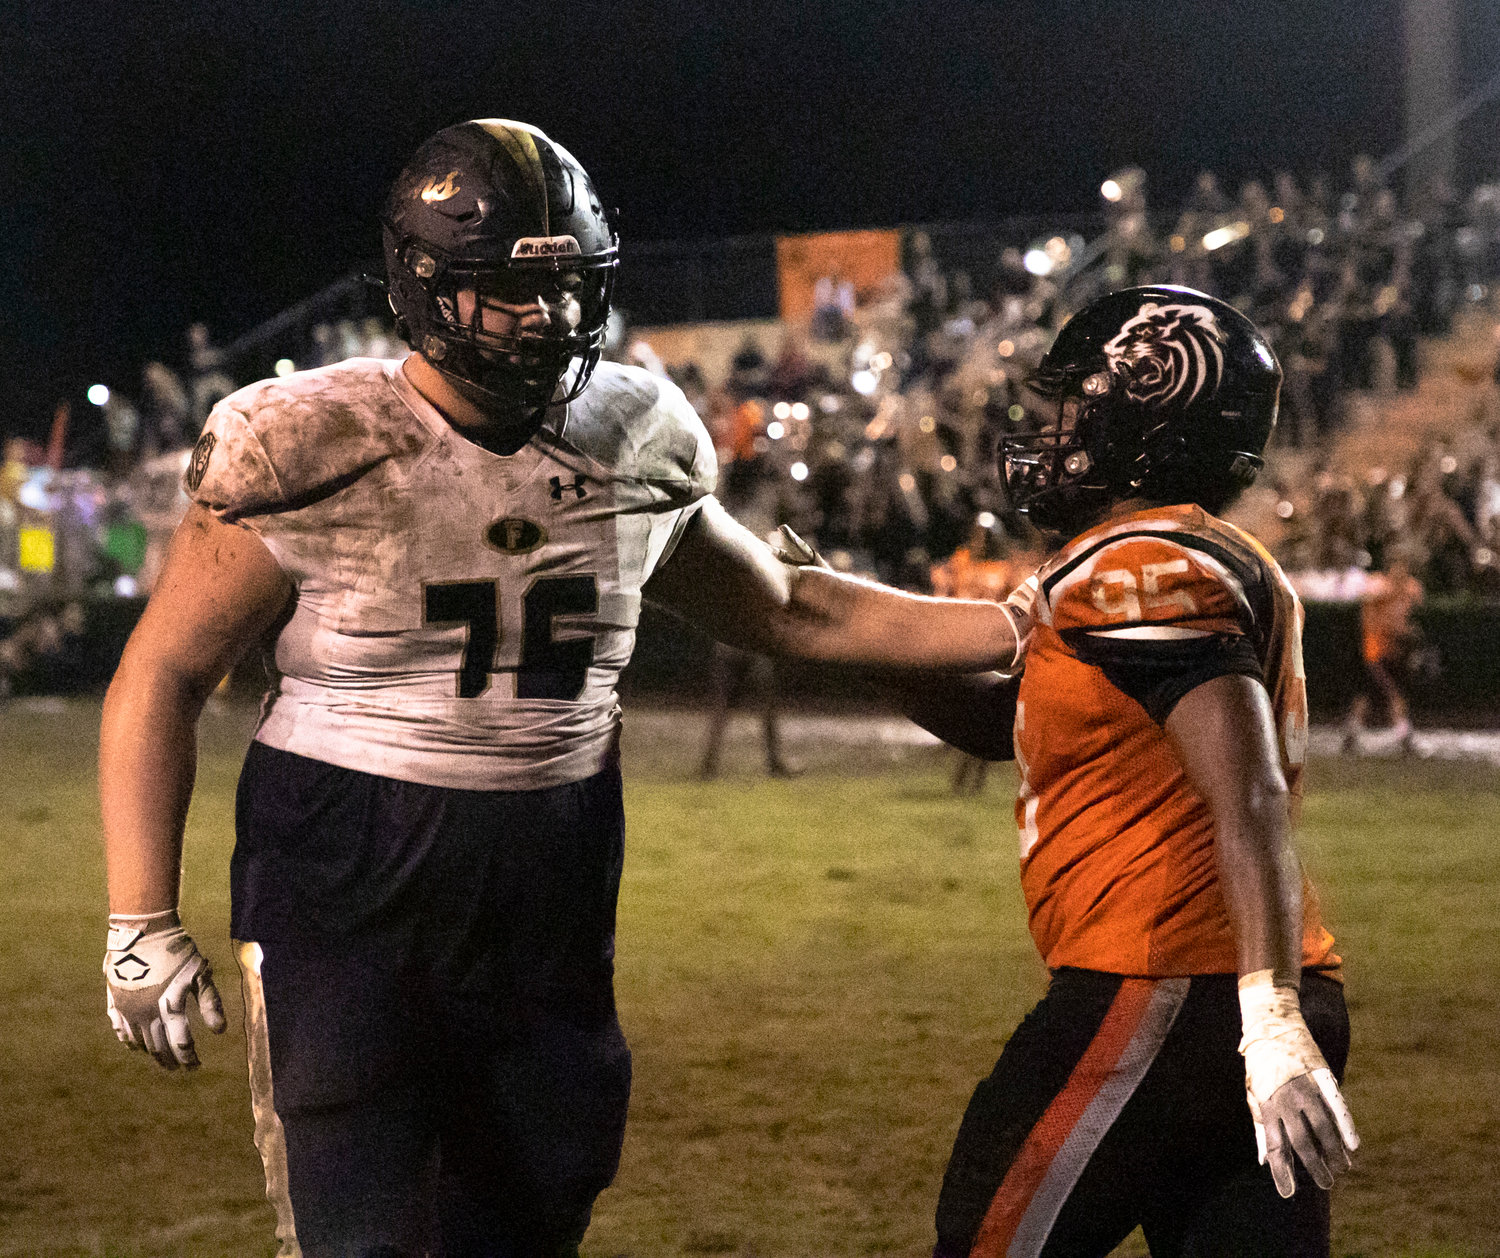 Linemen Logan Joellenbeck (76) and Kareem Stevens (95) acknowledge each other after Friday night’s non-region contest between the Foley Lions and Baldwin County Tigers in Bay Minette Aug. 26.